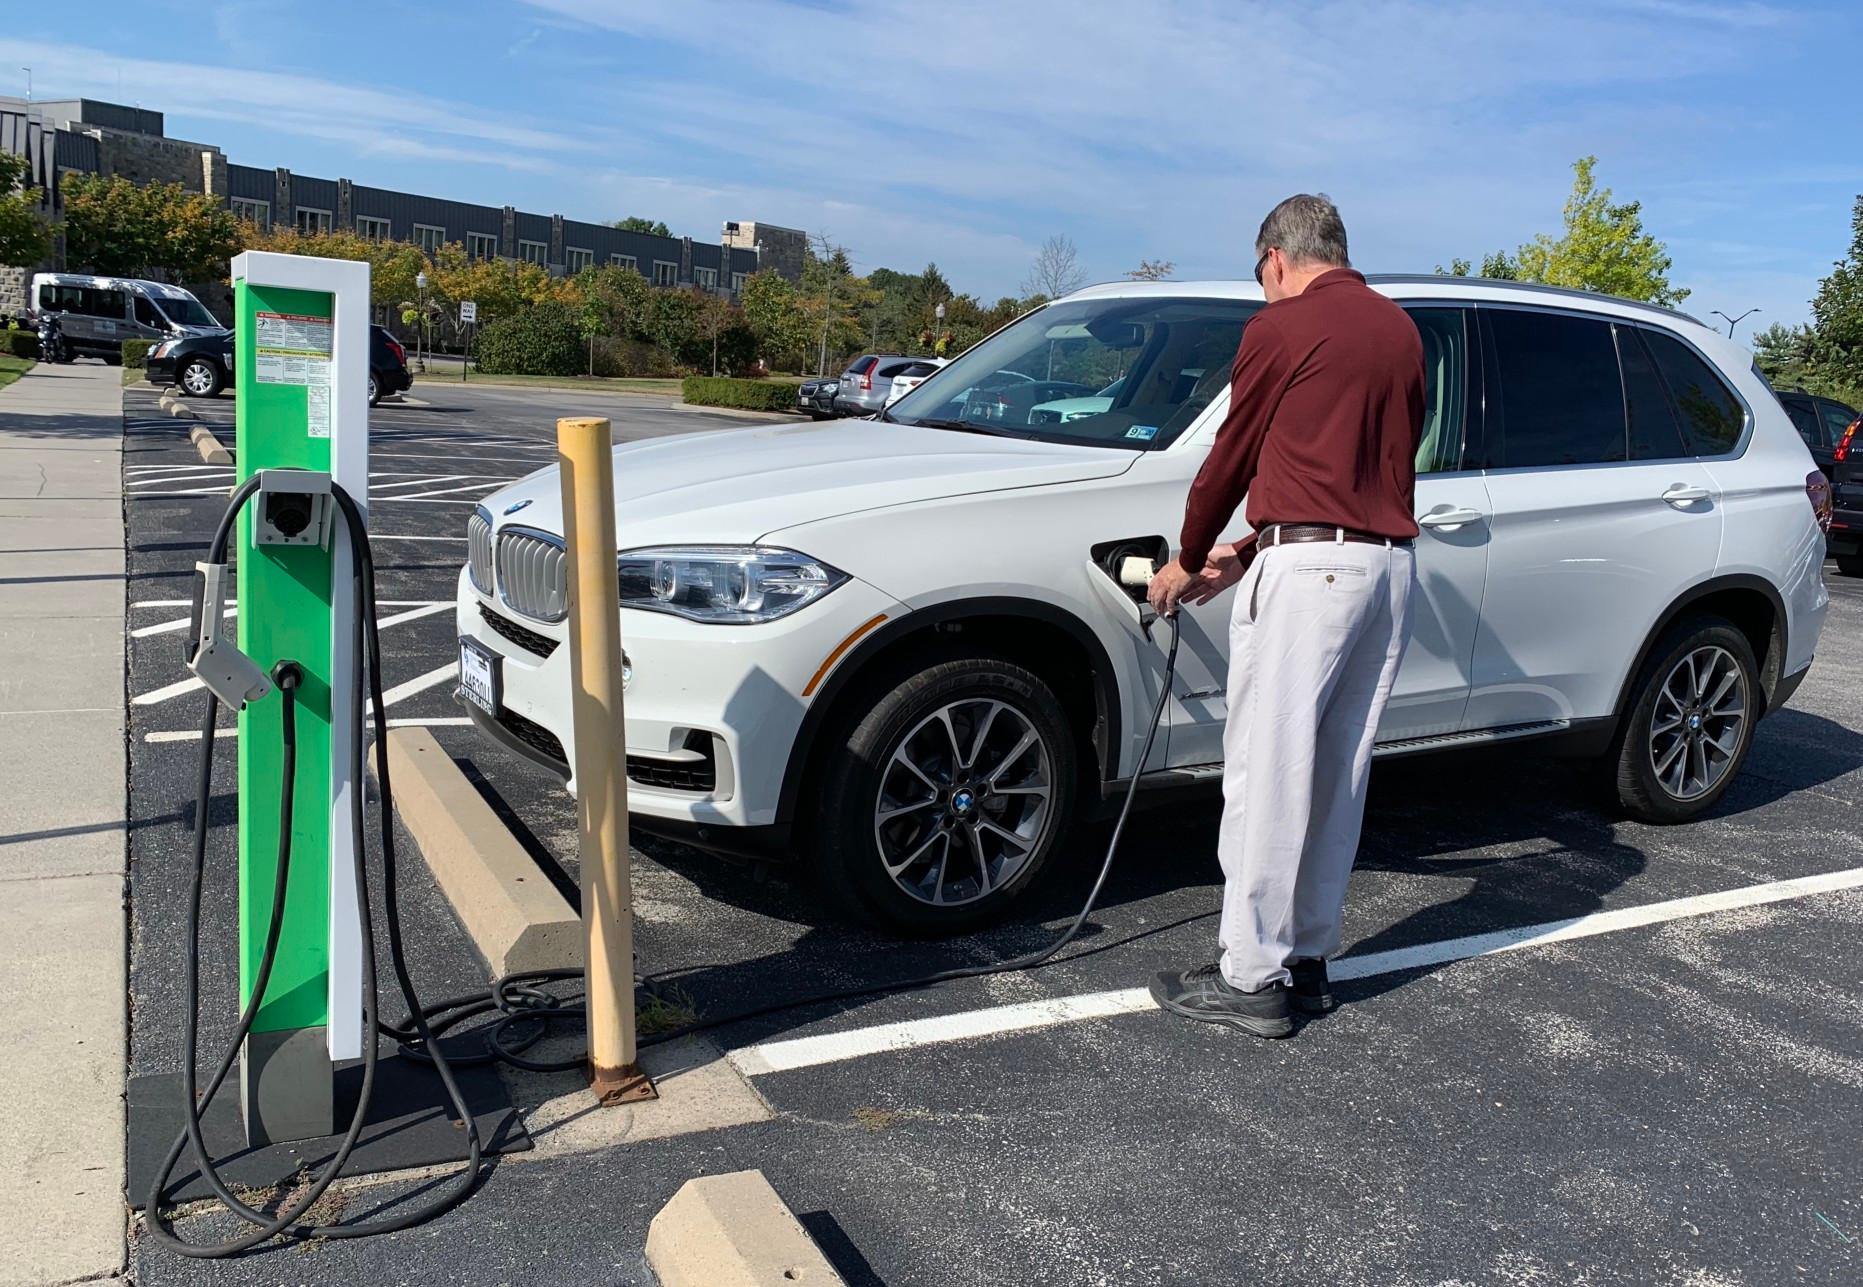 Availability of charging stations is a huge obstacle for EV adoption.